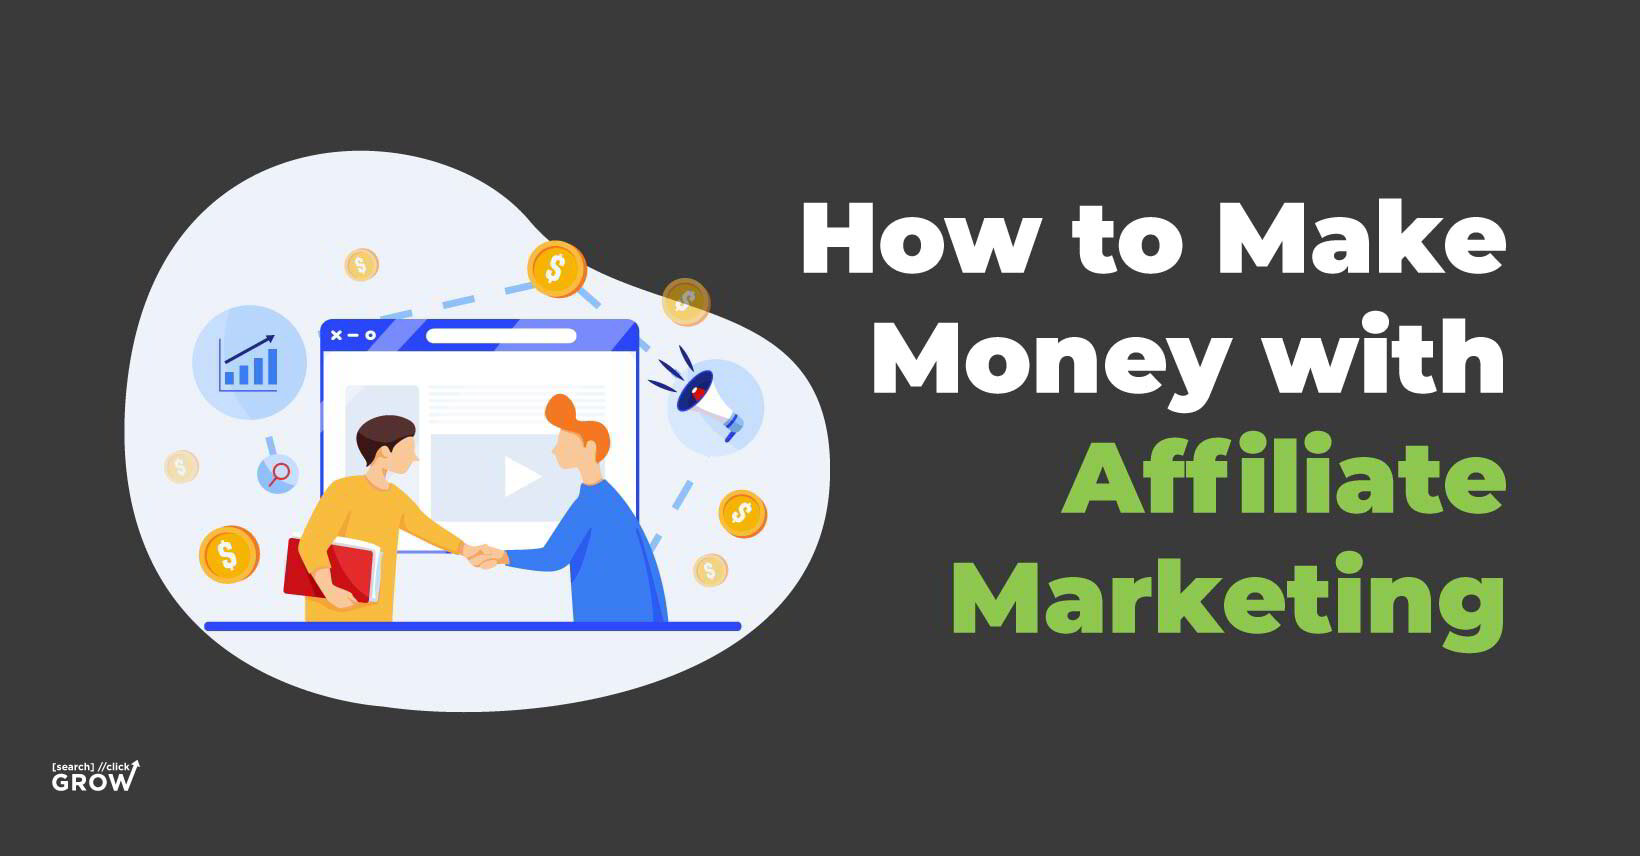 How Affiliate Marketing: A Practical Way To Make Extra Money ... - Due can Save You Time, Stress, and Money.